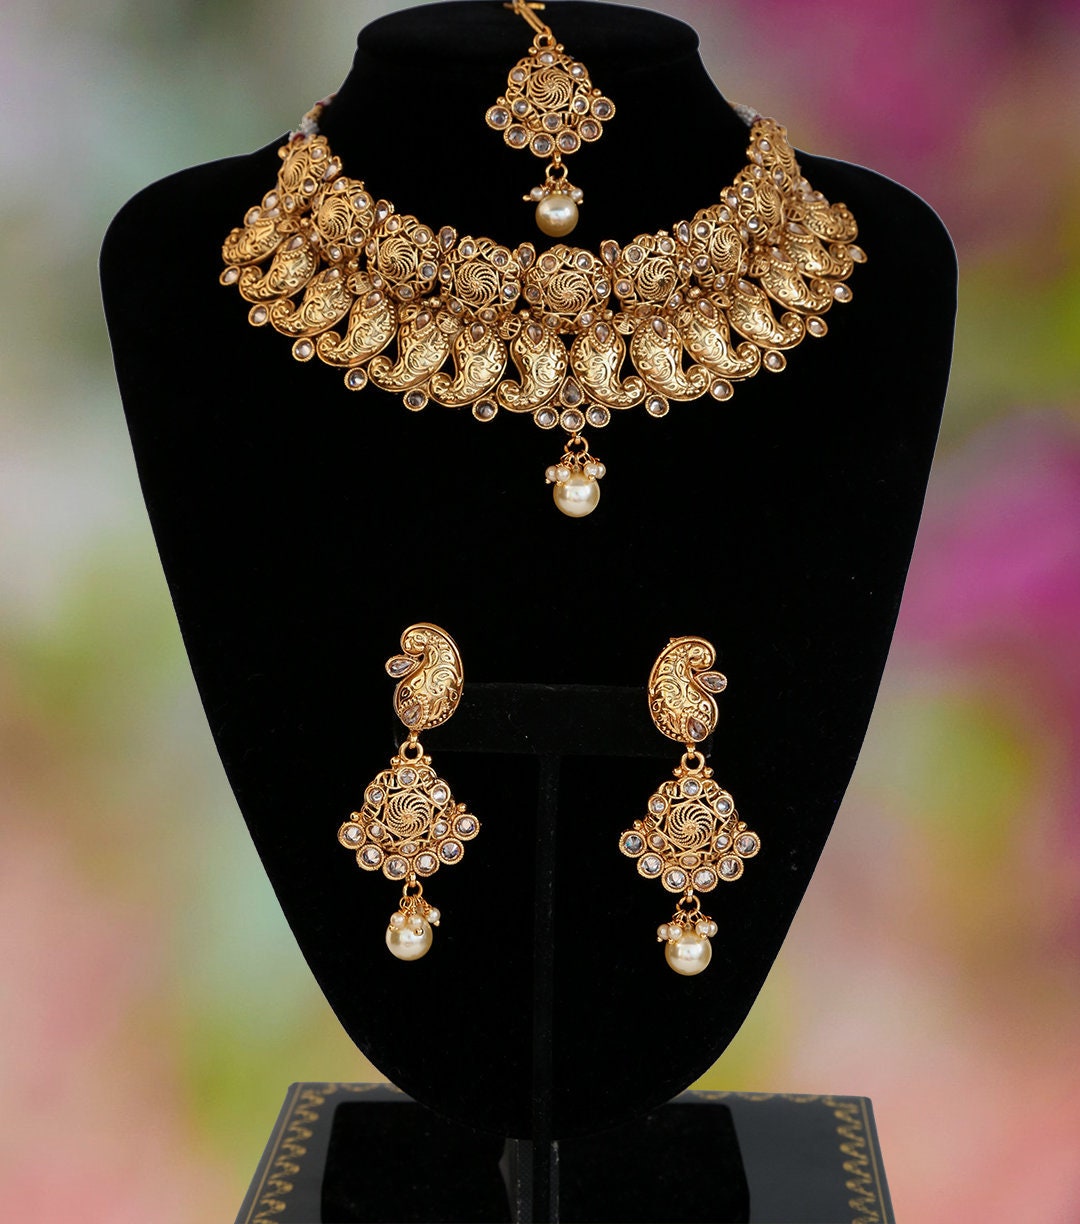 High quality Gold Polish Polki Choker Necklace with matching earrings and Mang tikka